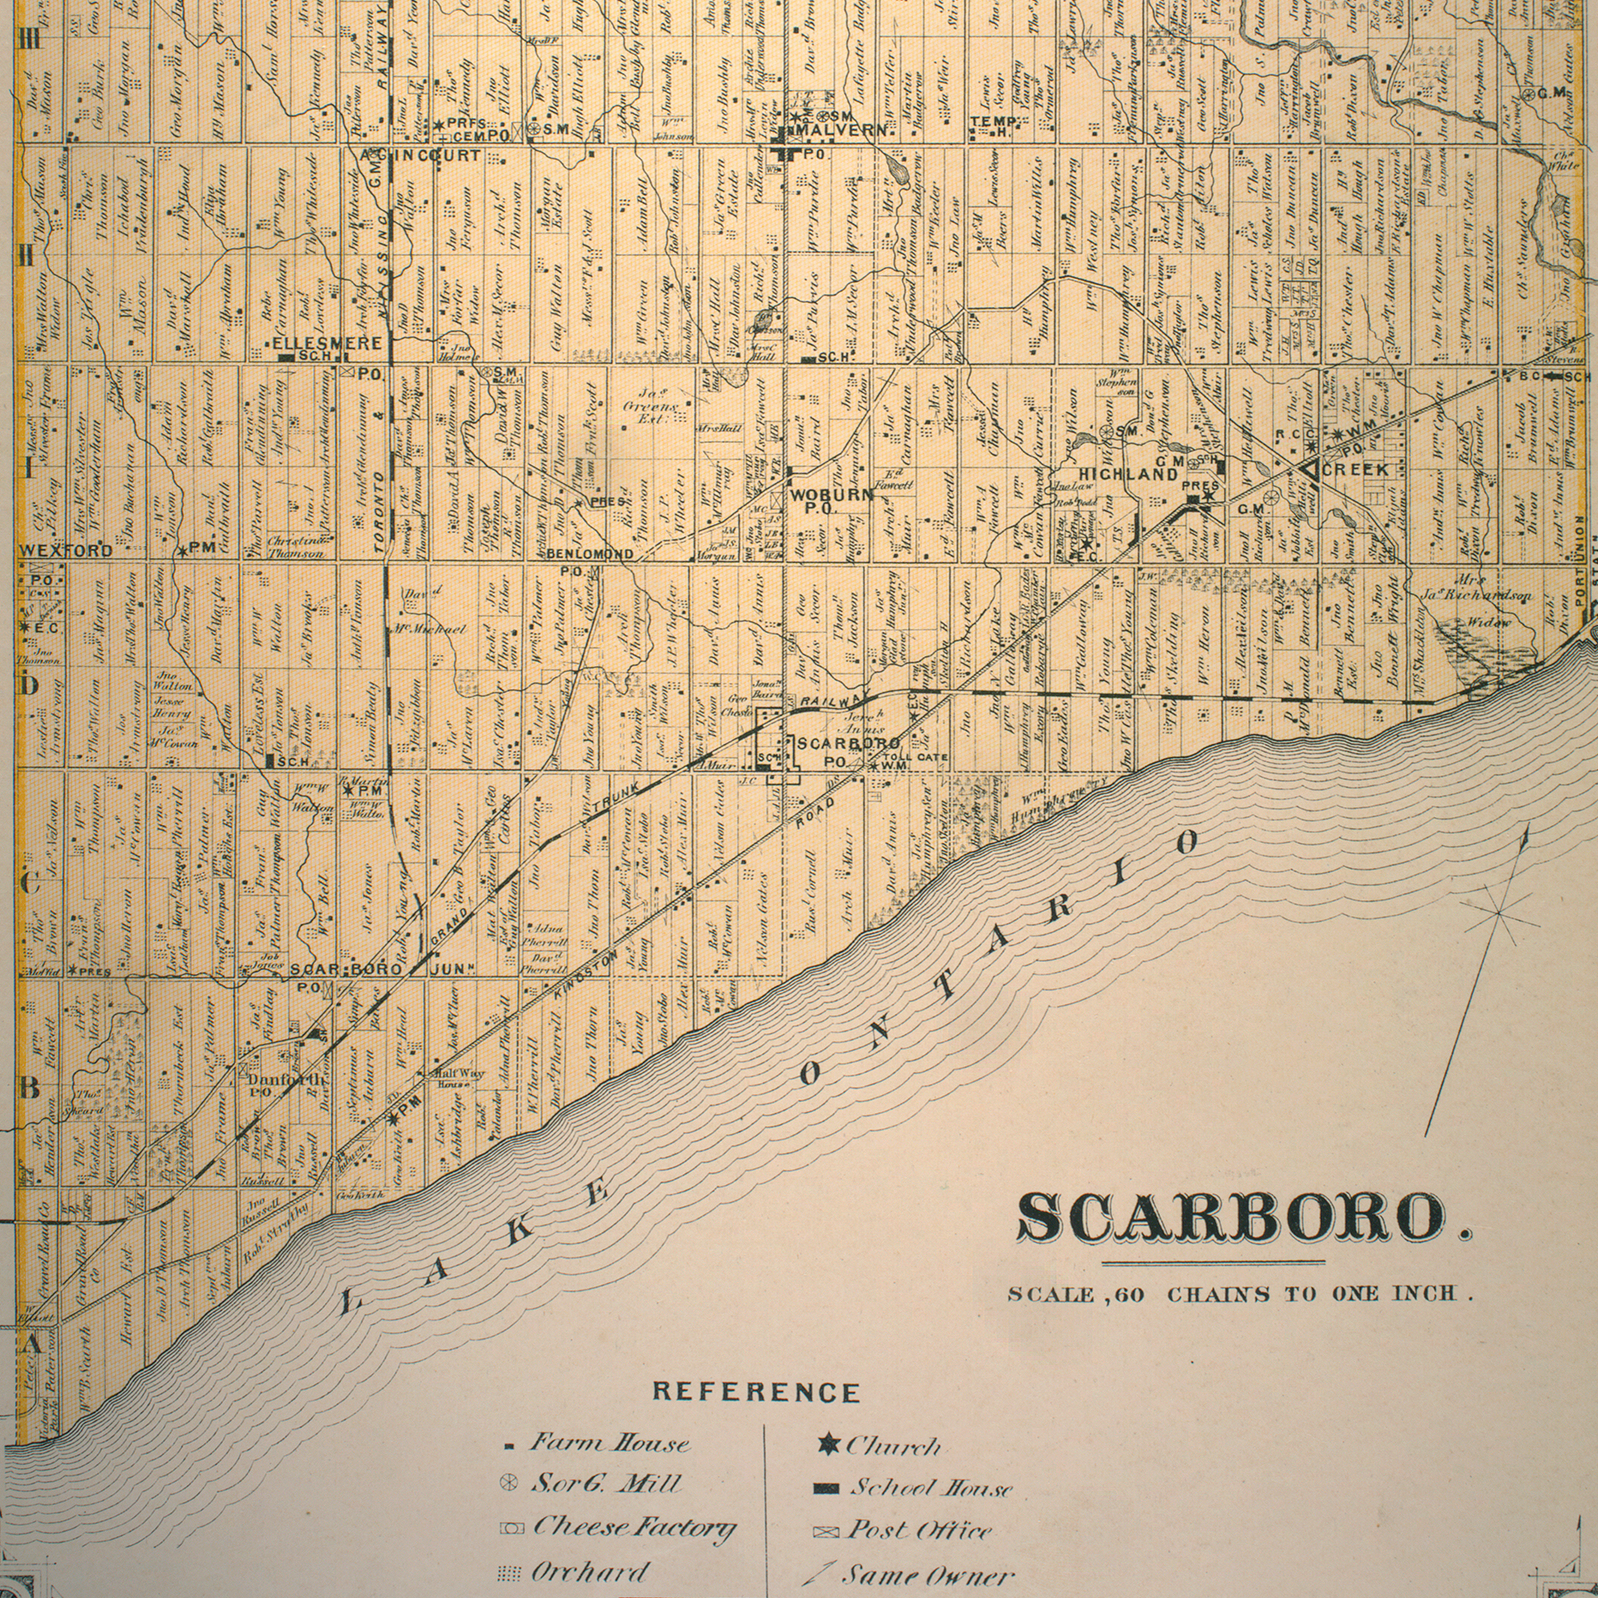 A historical map of Scarborough from 1850